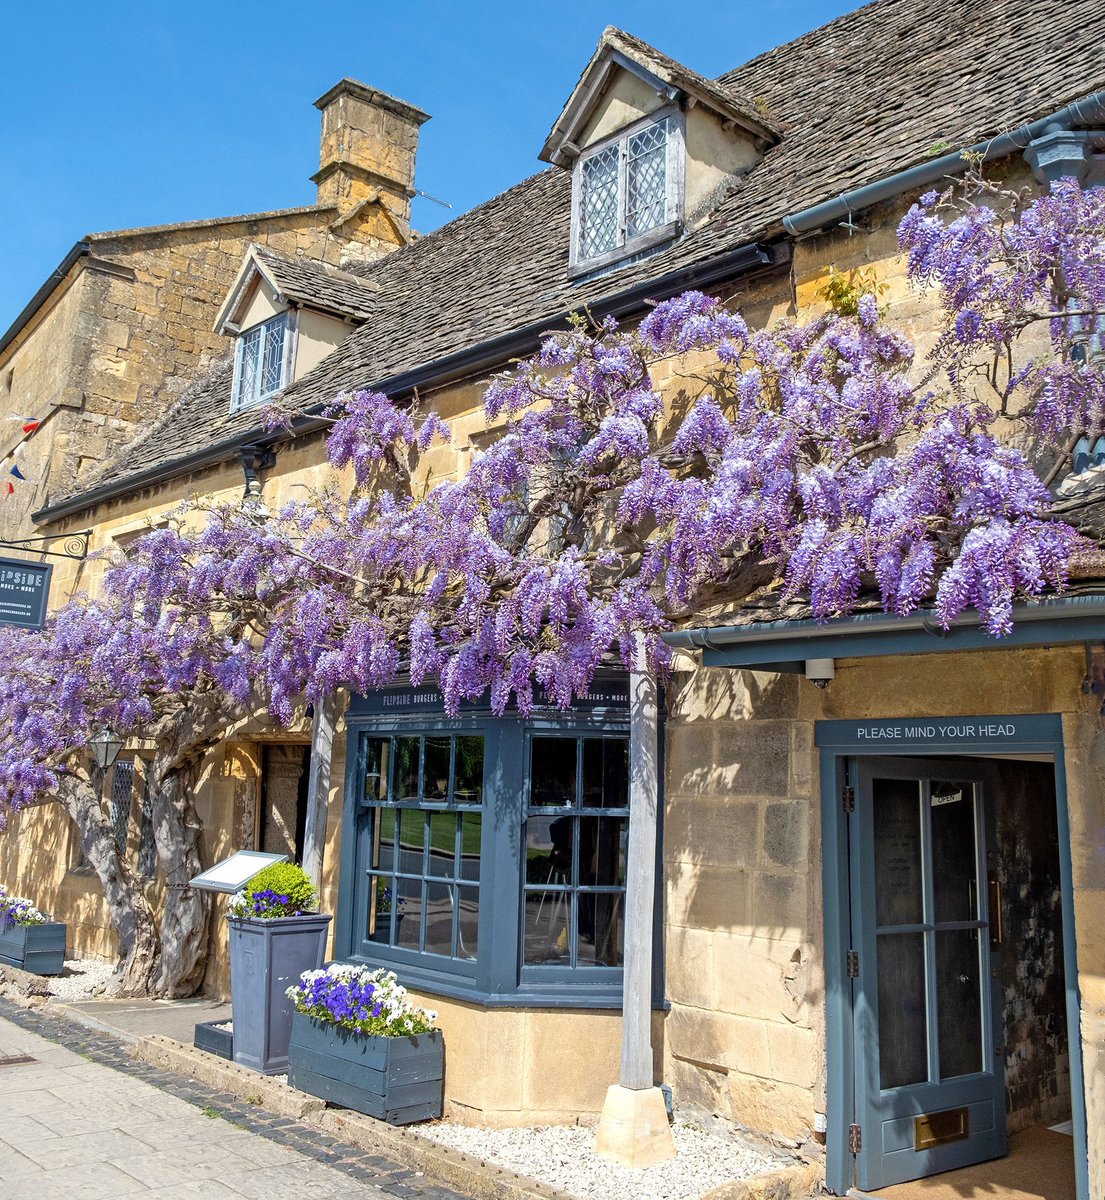 What's coming up in the Cotswolds in May? 💙 See bluebells carpeting the woods 🎵Chipping Campden @ccmusicfest (11–25 May) 🥾 Winchcombe Walking Festival (17–19 May) 🚂 The @gwsr Festival of Steam (25–27 May) 🧀 Cheese rolling at Cooper’s Hill (27 May)